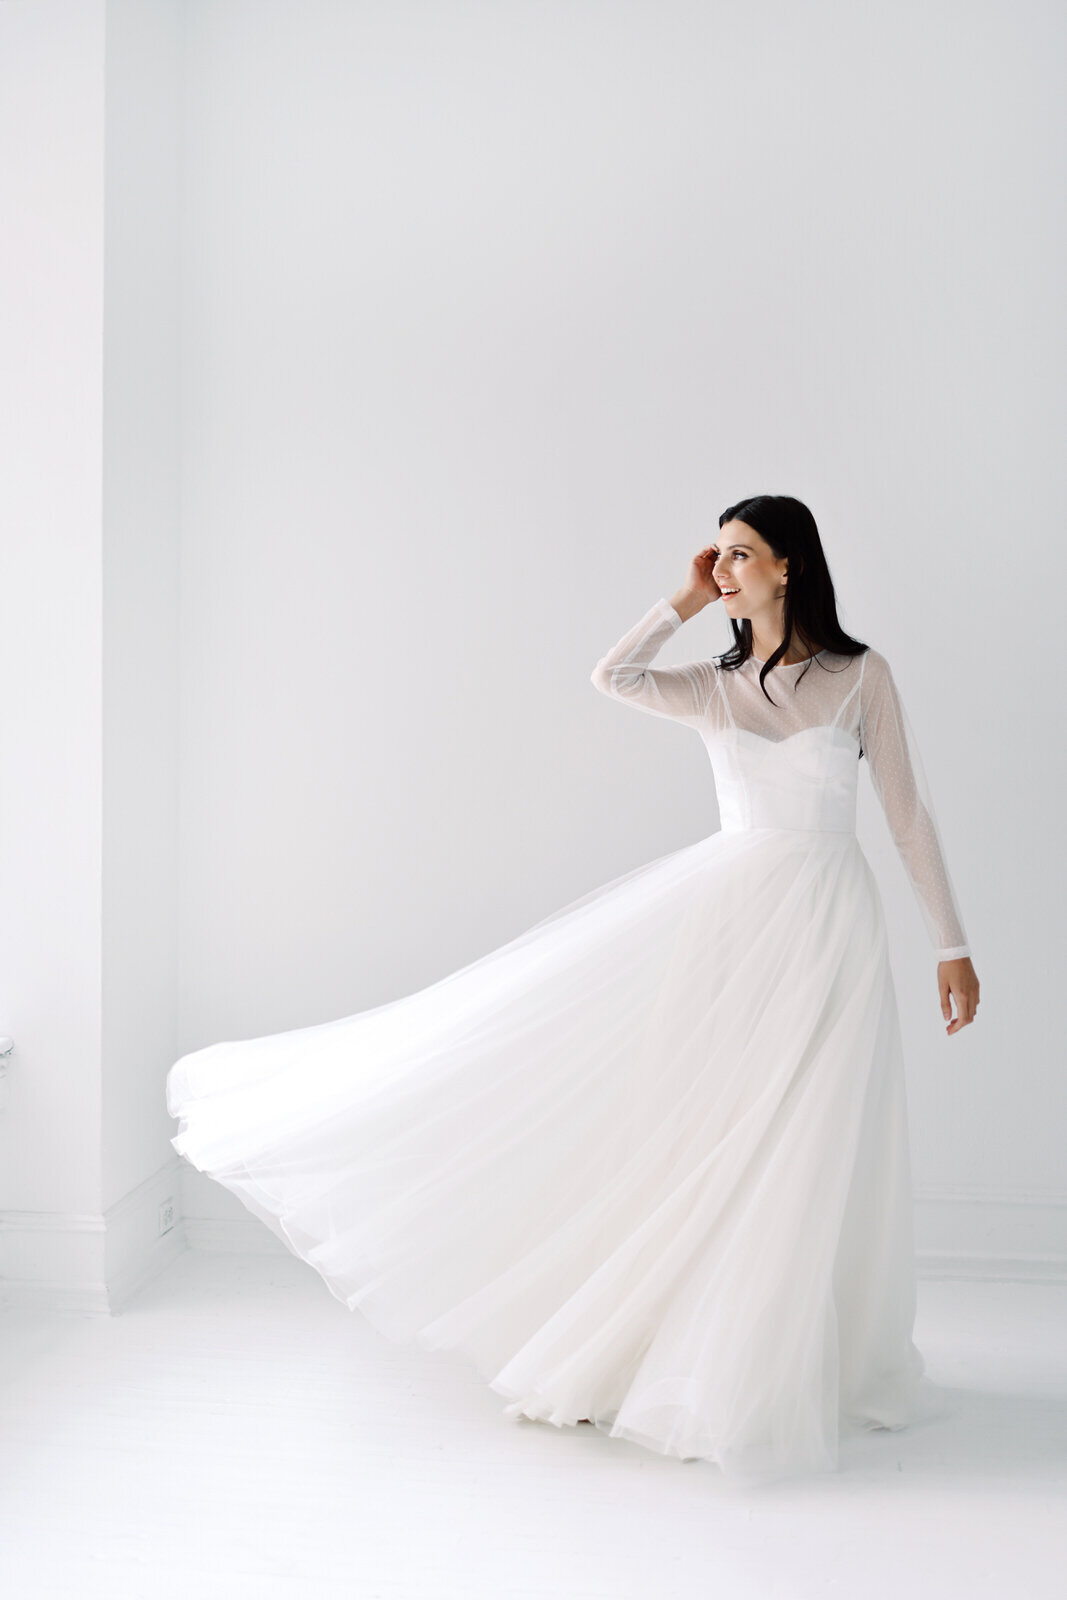 Stylish Bridal Editorial Photography for a New York City Brand 1